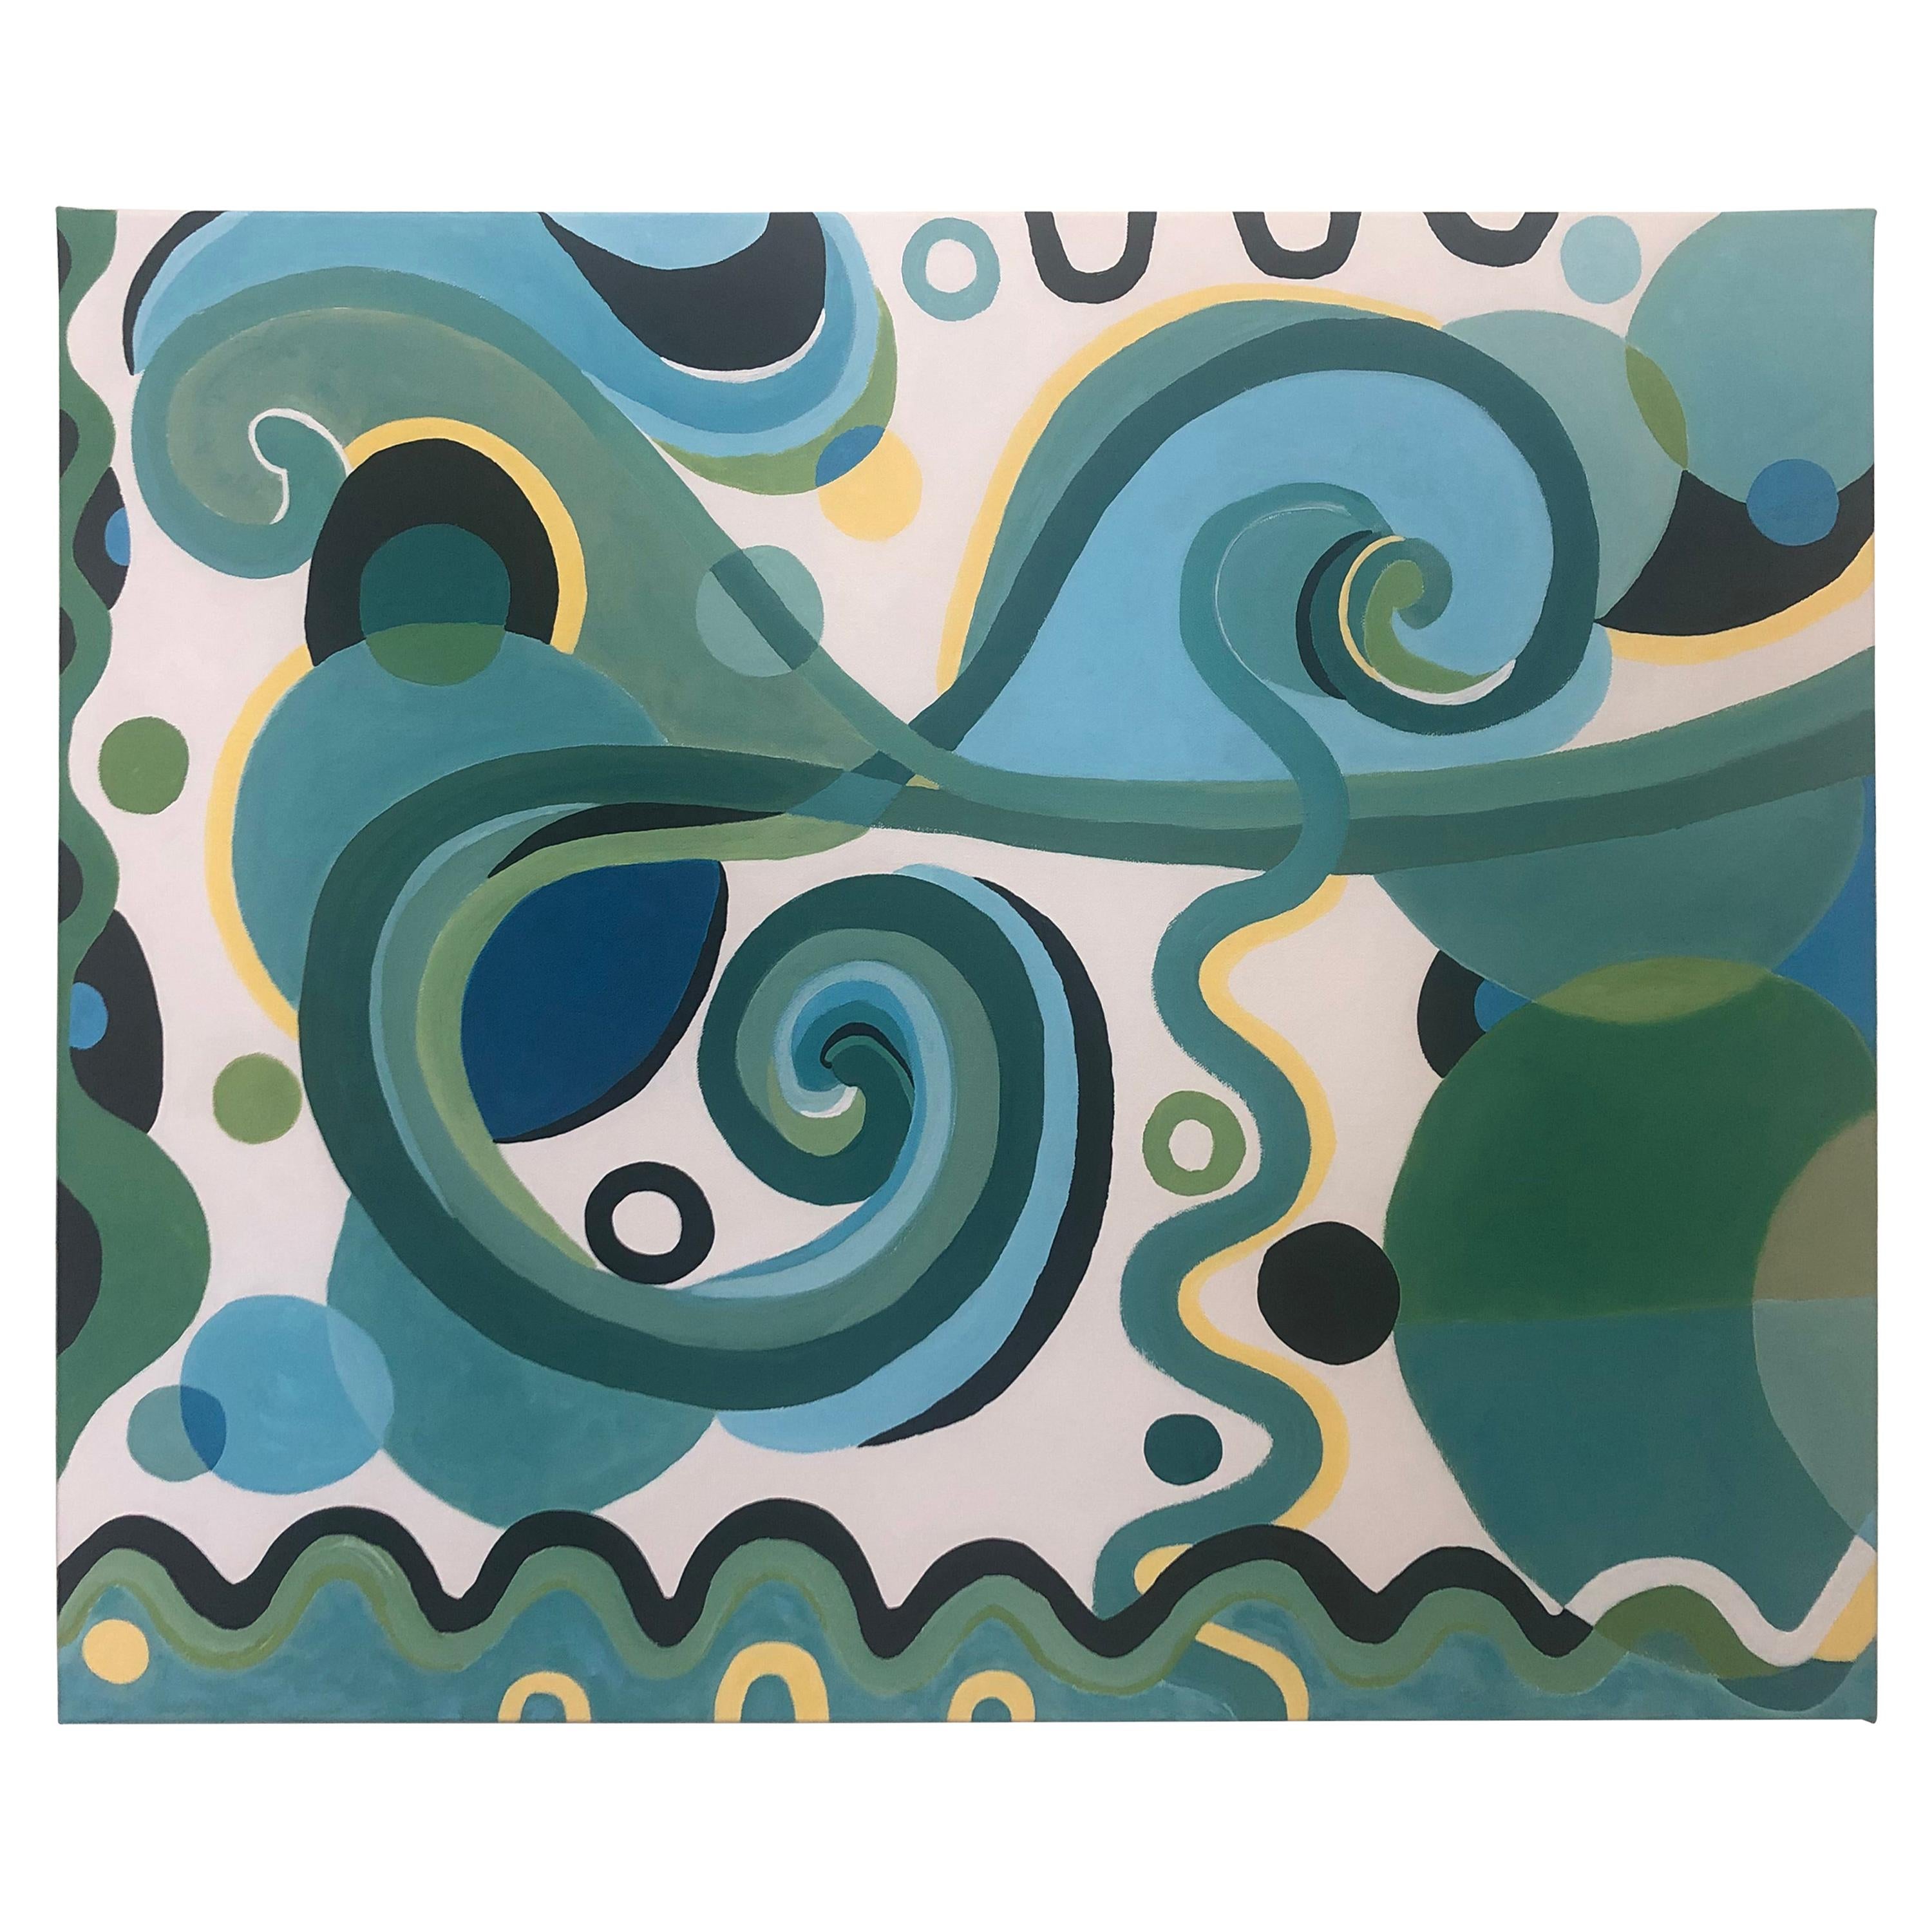 Refreshing "Jazzy" Abstract with Curlicues and Circles